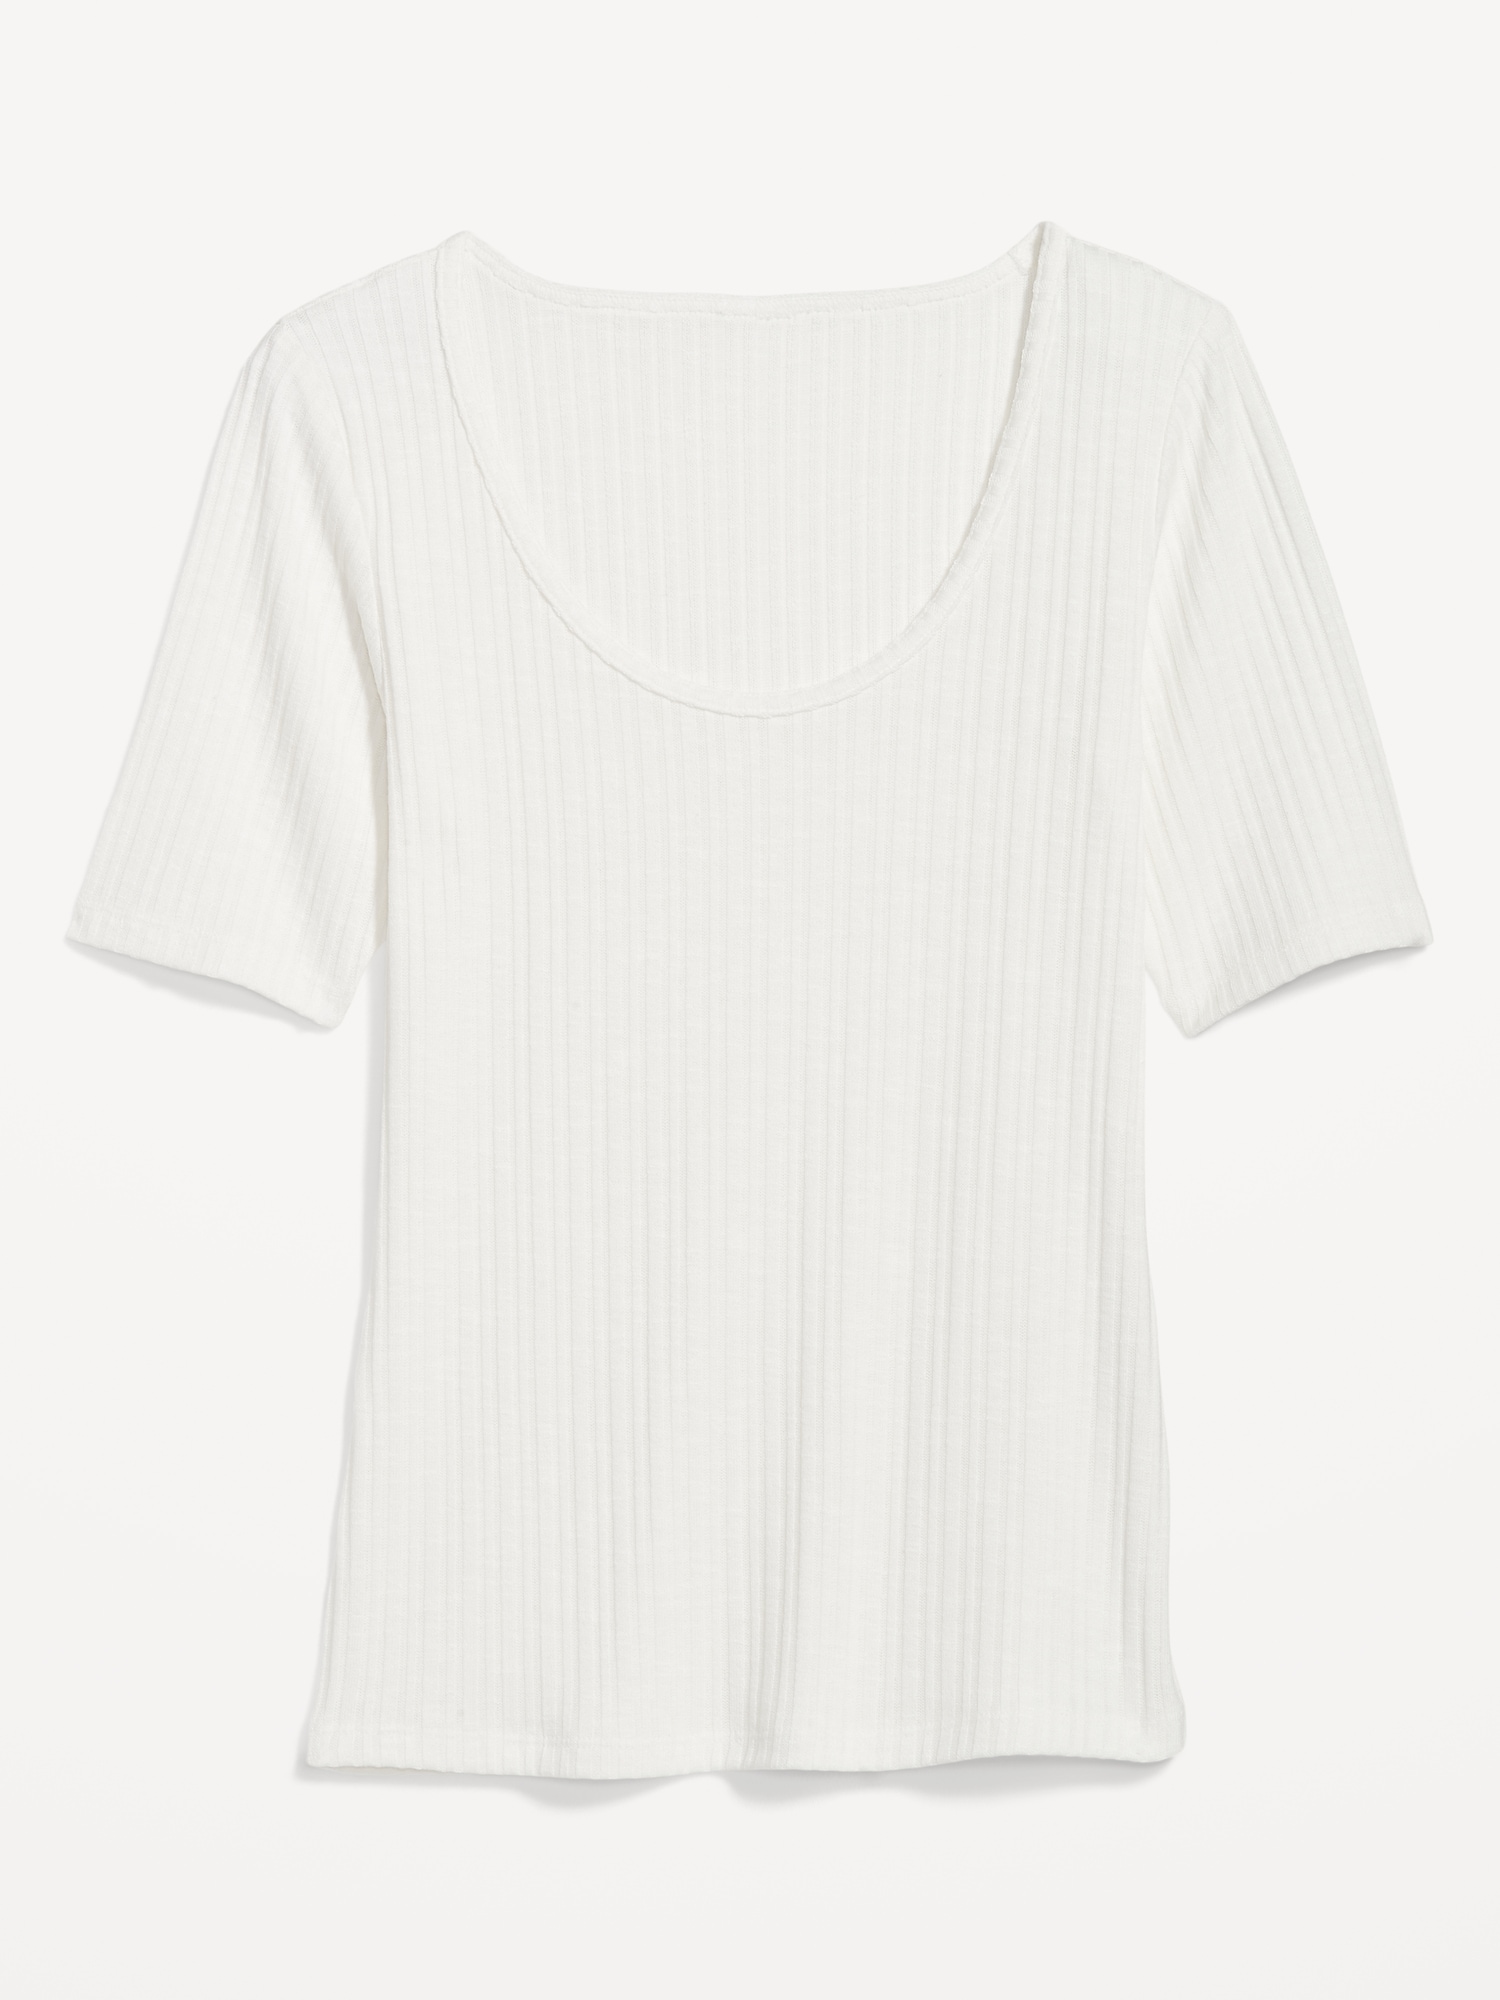 Fitted Elbow-Sleeve Rib-Knit T-Shirt for Women | Old Navy